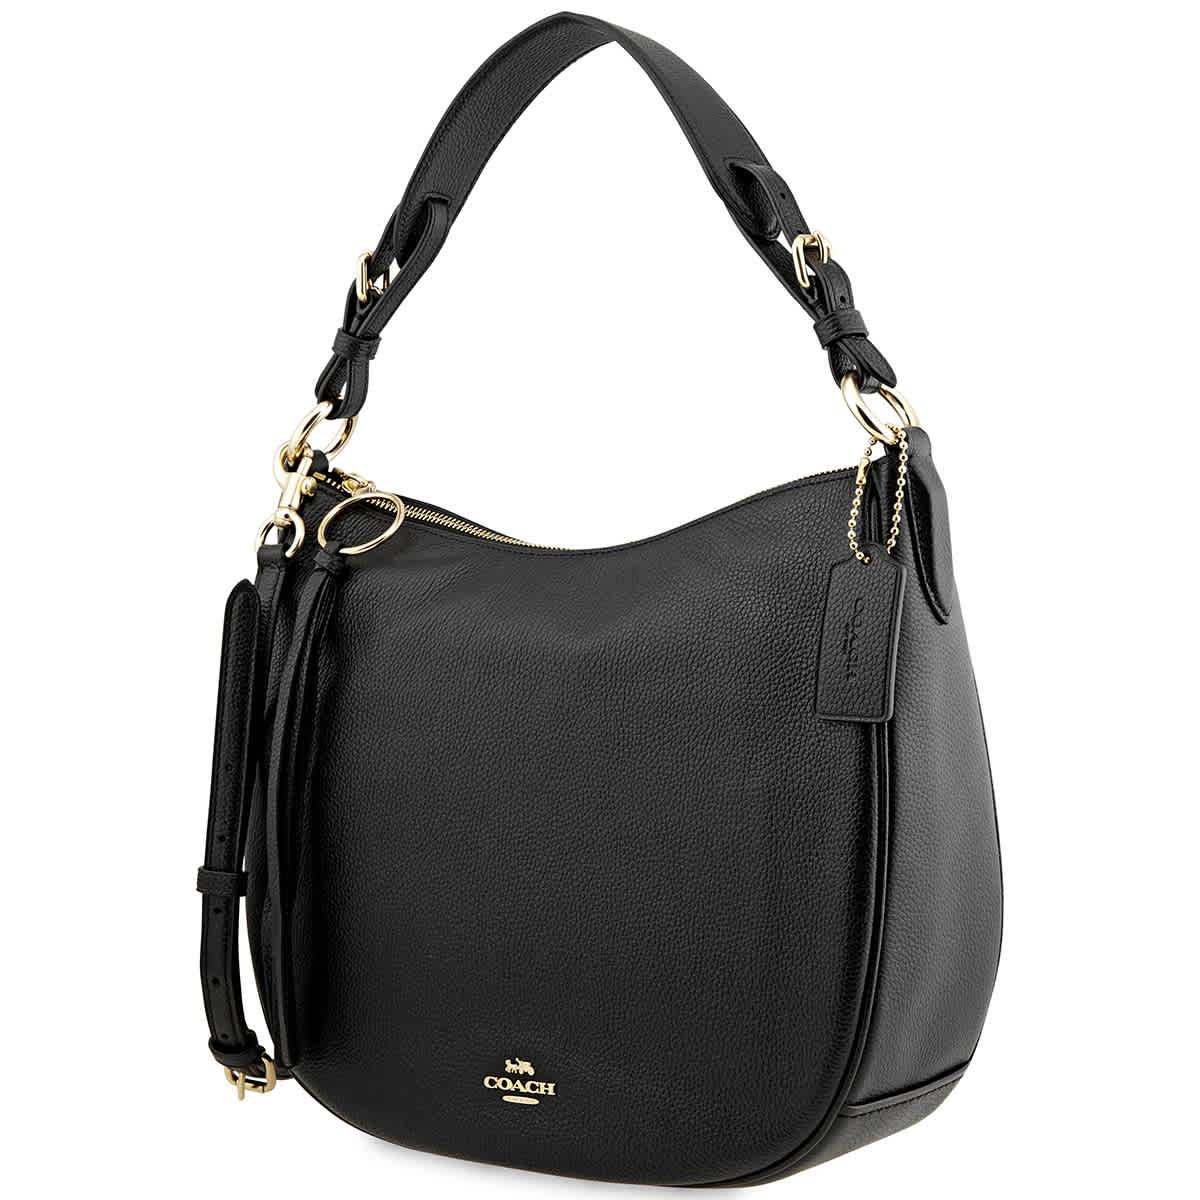 COACH Leather Sutton Hobo Bag in Black - Save 47% - Lyst